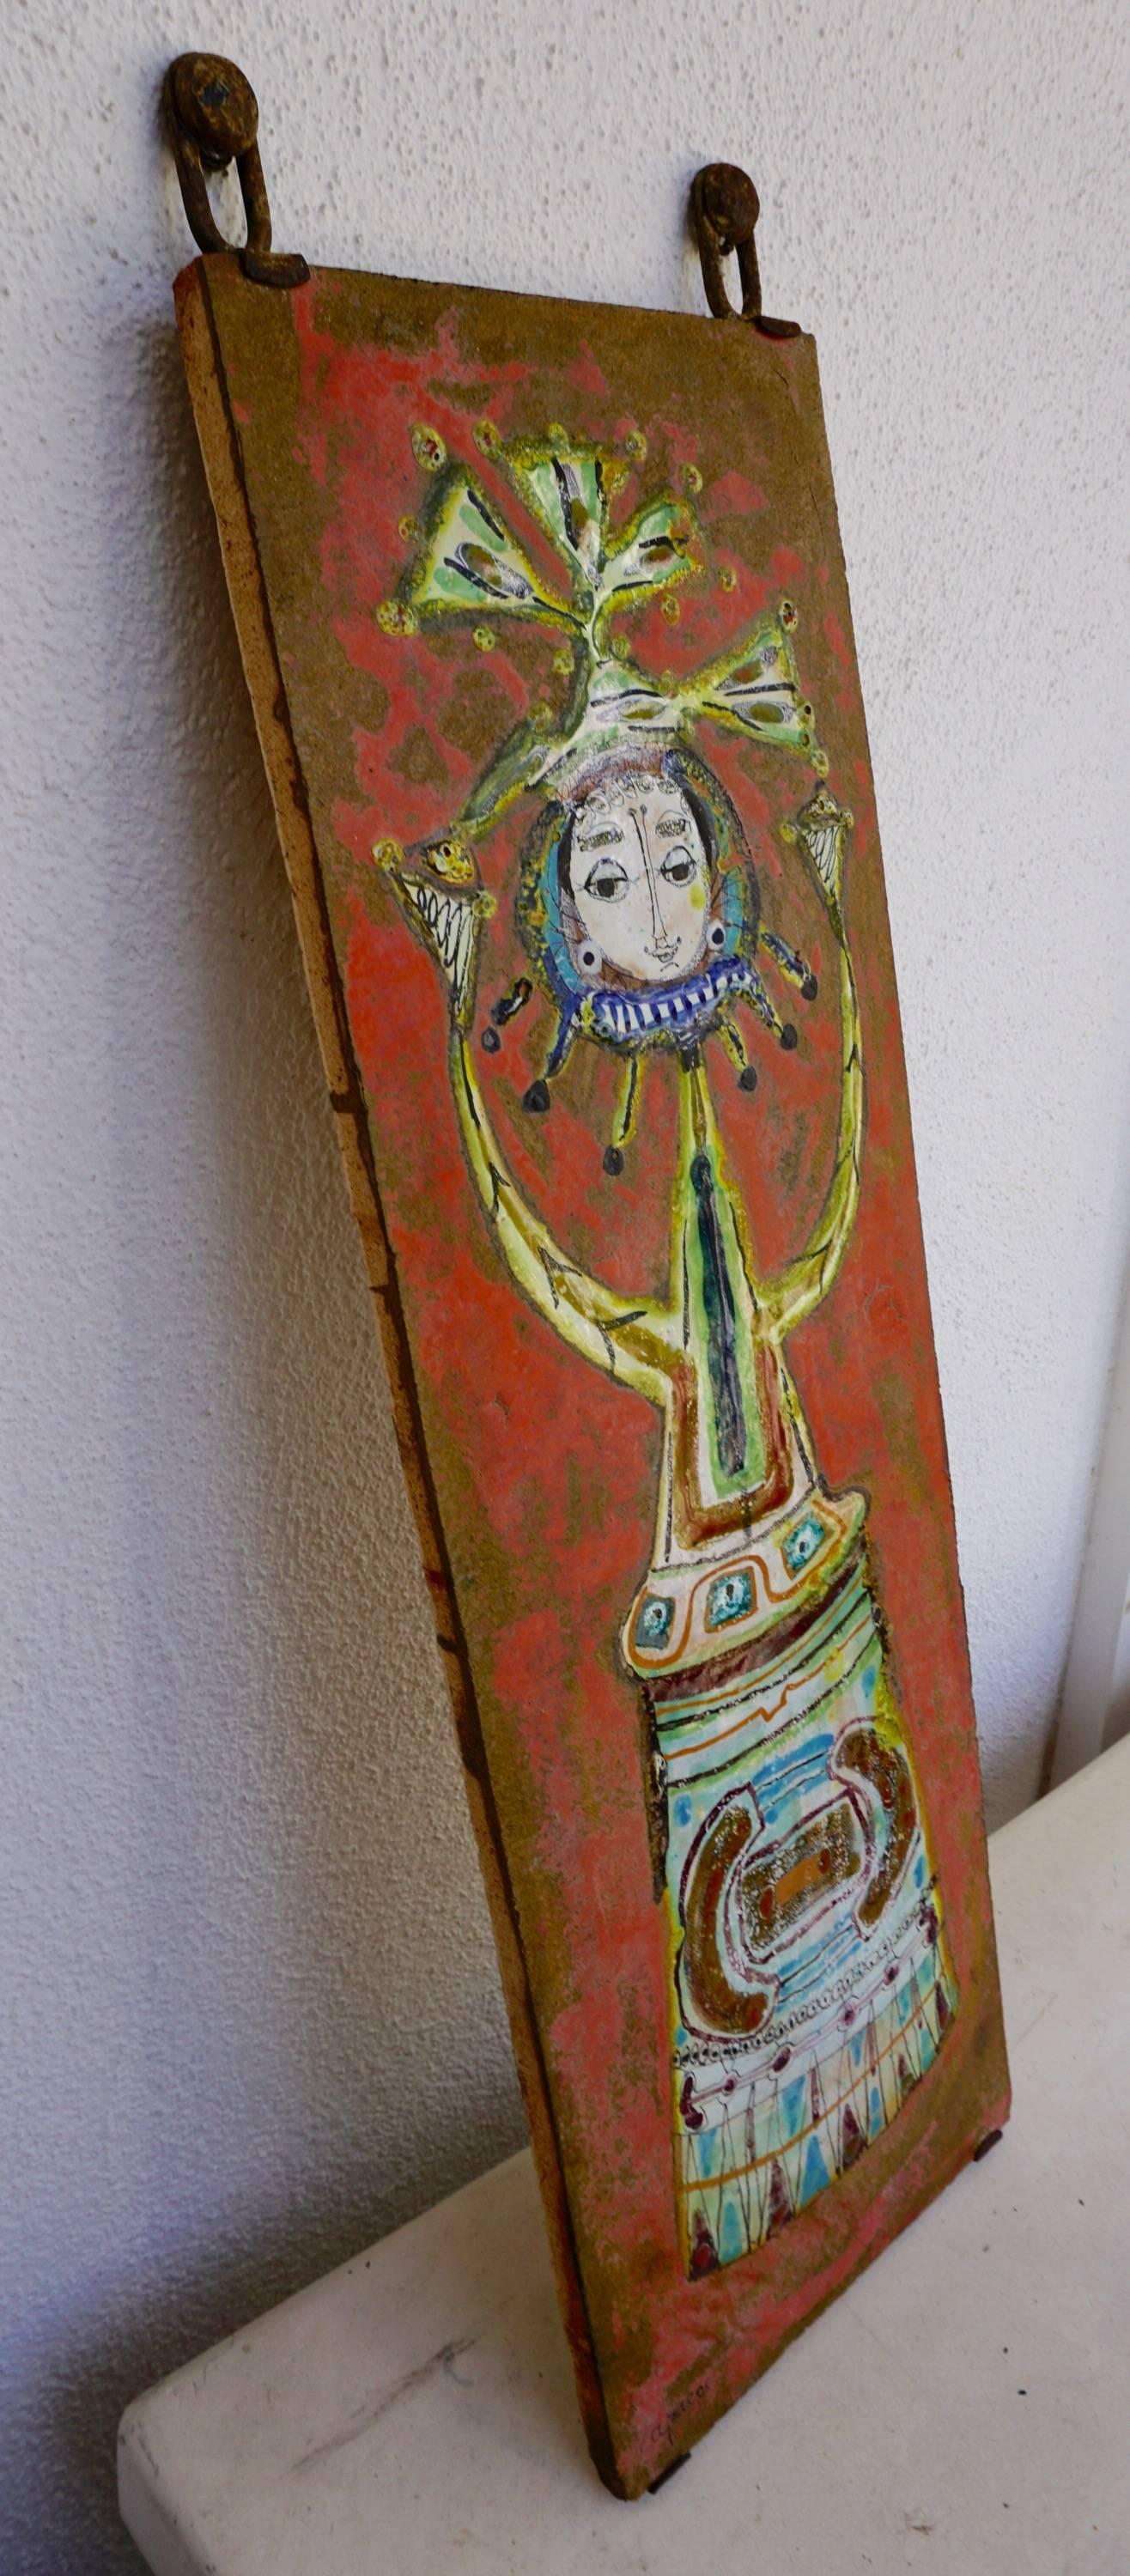 Hand-painted and glazed. Executed in the 1960s by Italian ceramicist Bruno Capacci. Signed at the base of the tile.